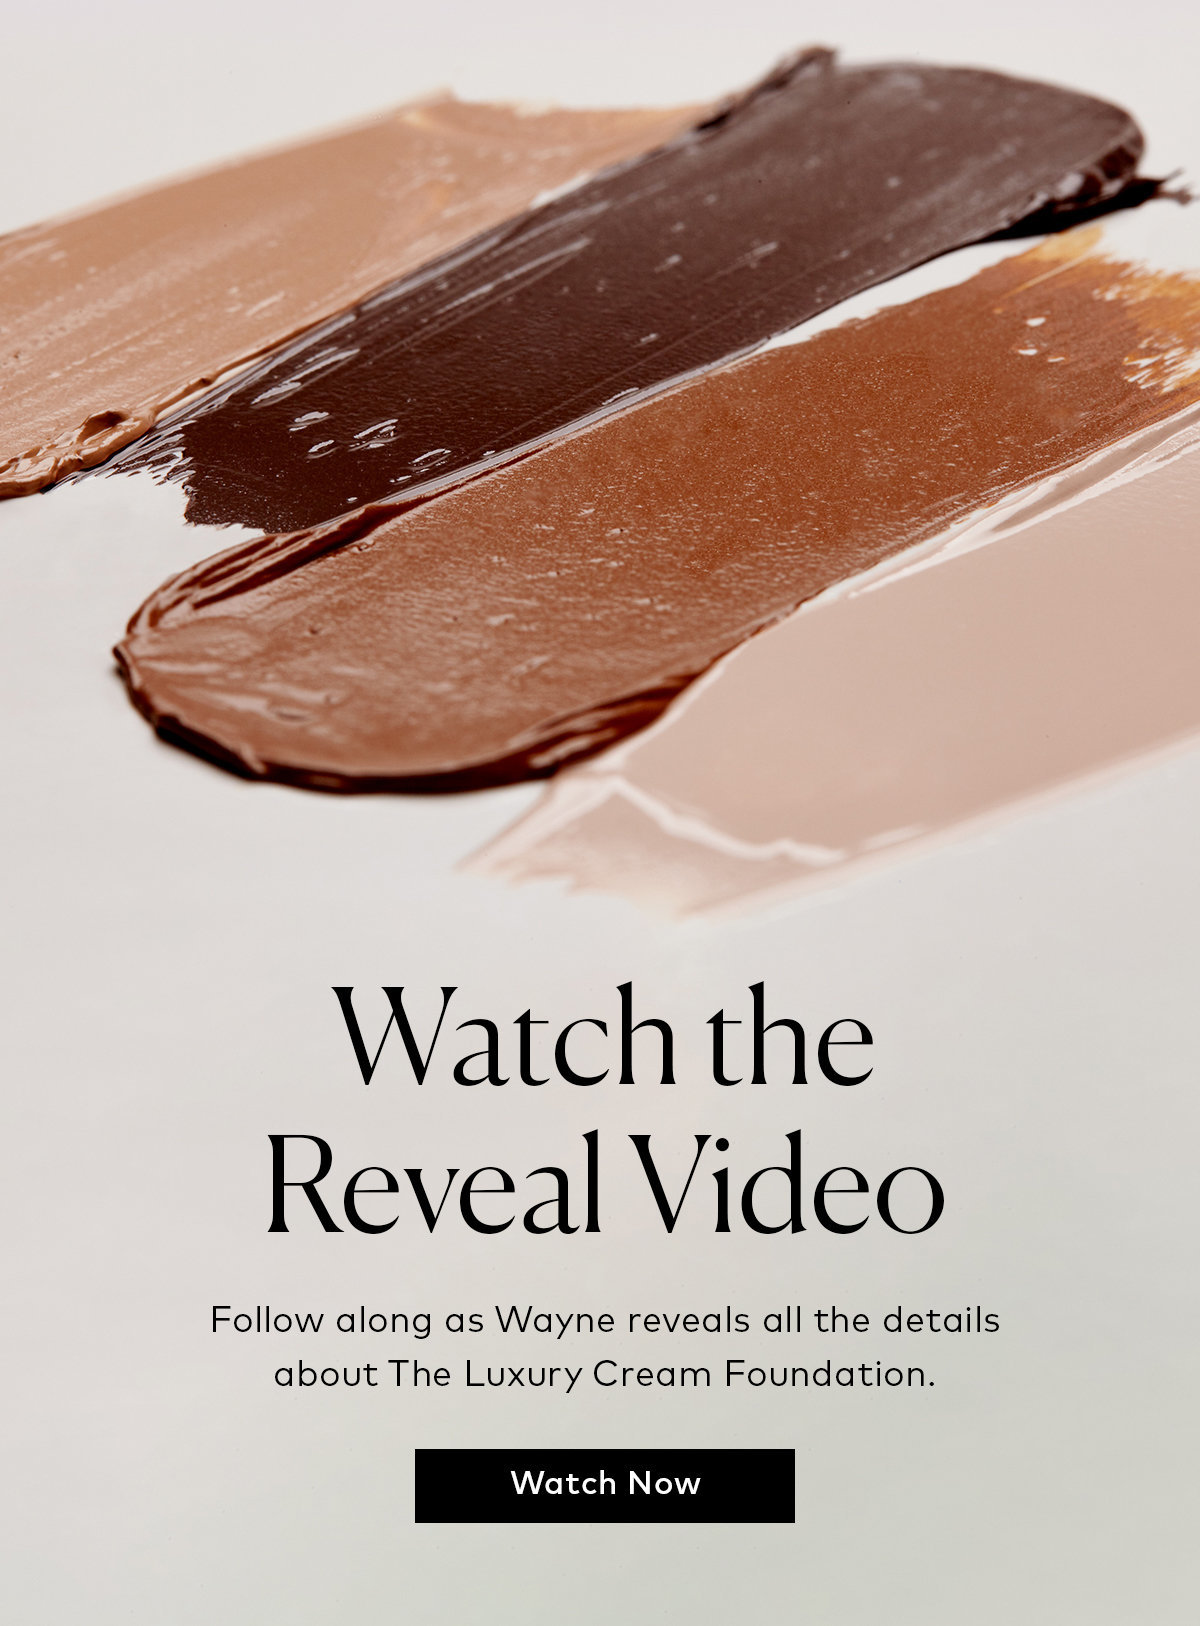  Watch the Reveal Video Follow along as Wayne reveals all the details about The Luxury Cream Foundation. 